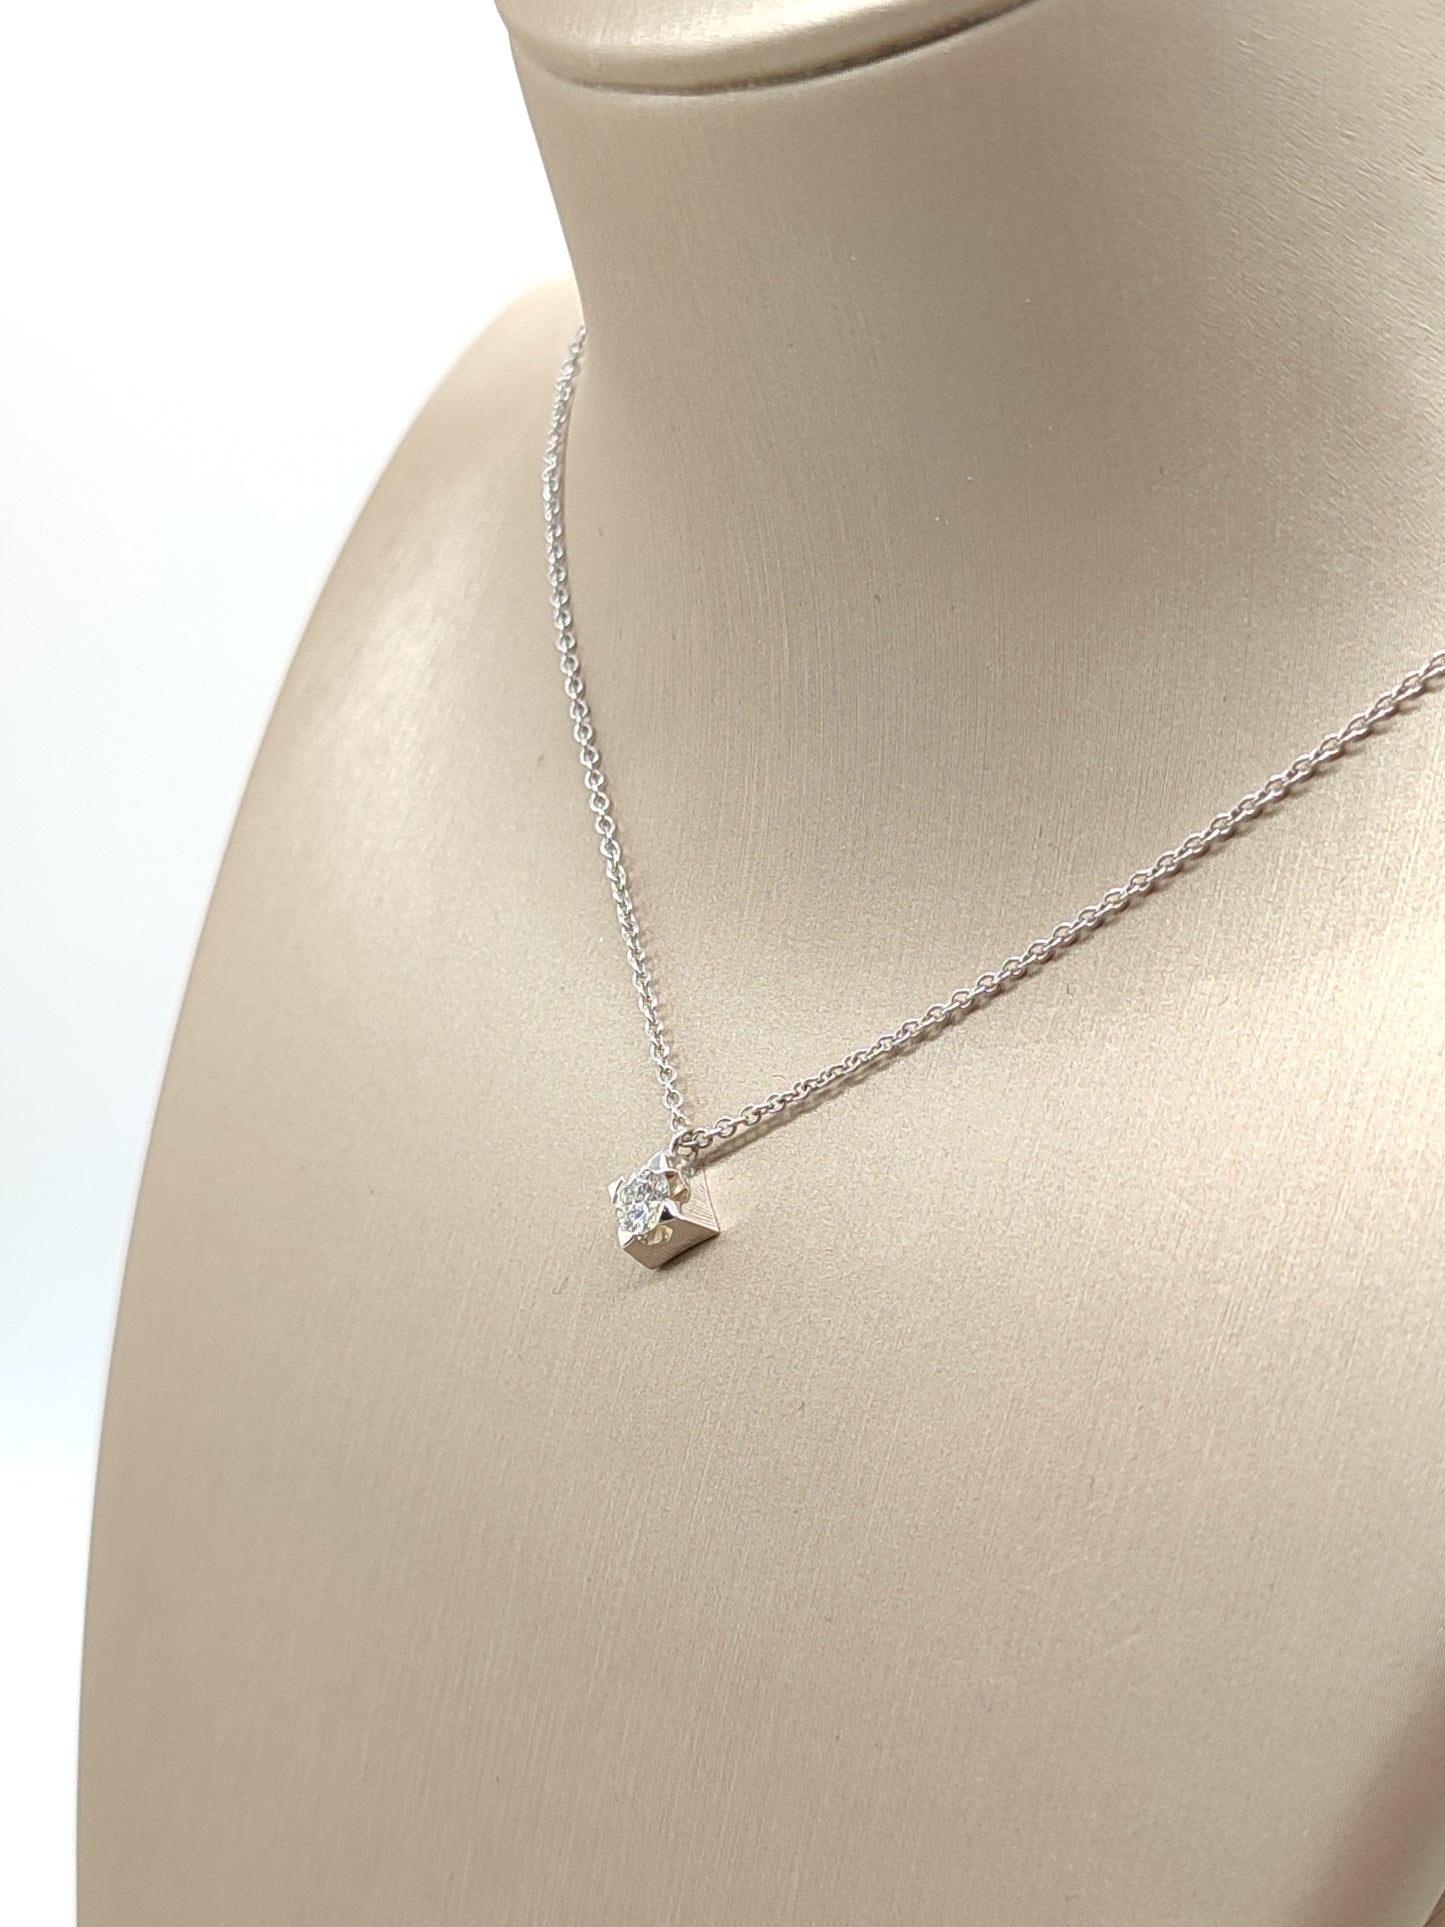 Gold necklace with 0.24ct light point diamond